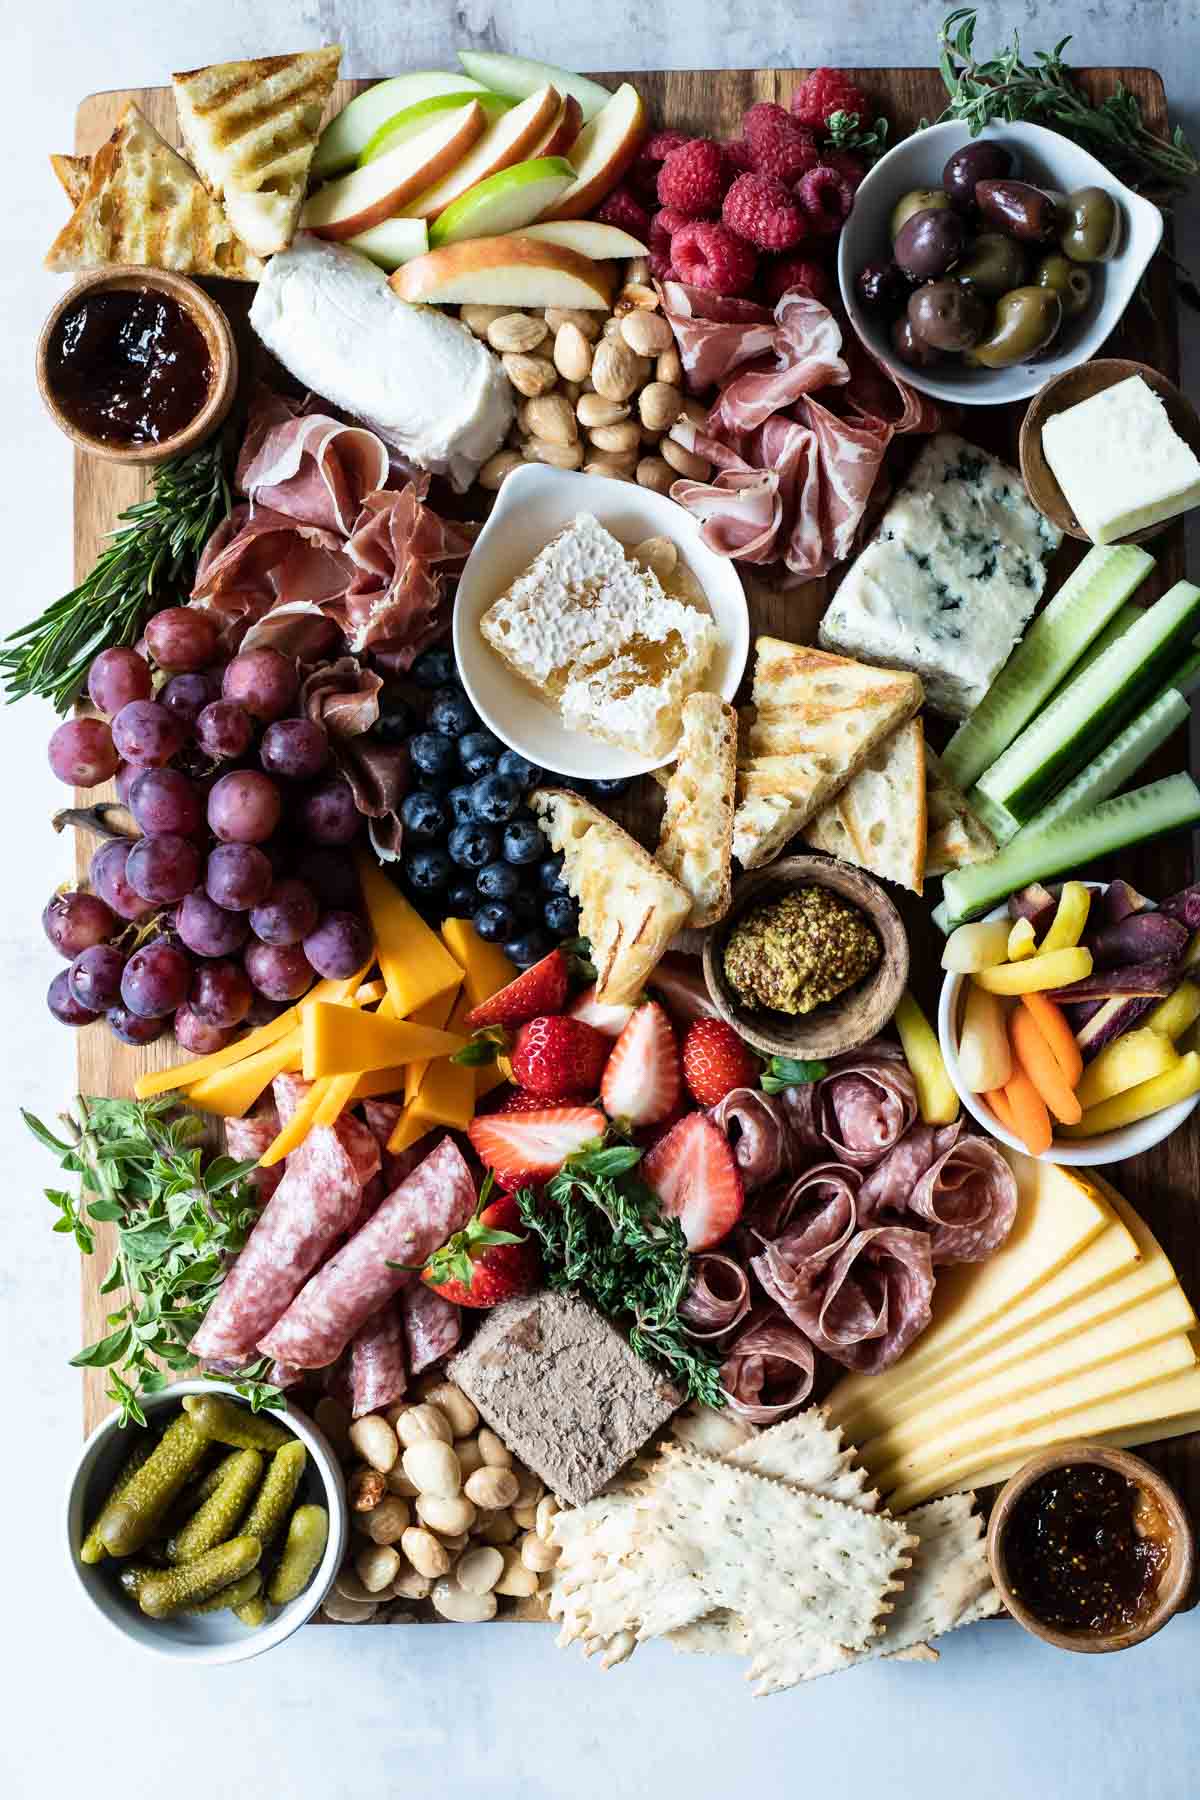 A charcuterie board filled with meats, cheese, fruits, nuts, crackers, and other snacks.